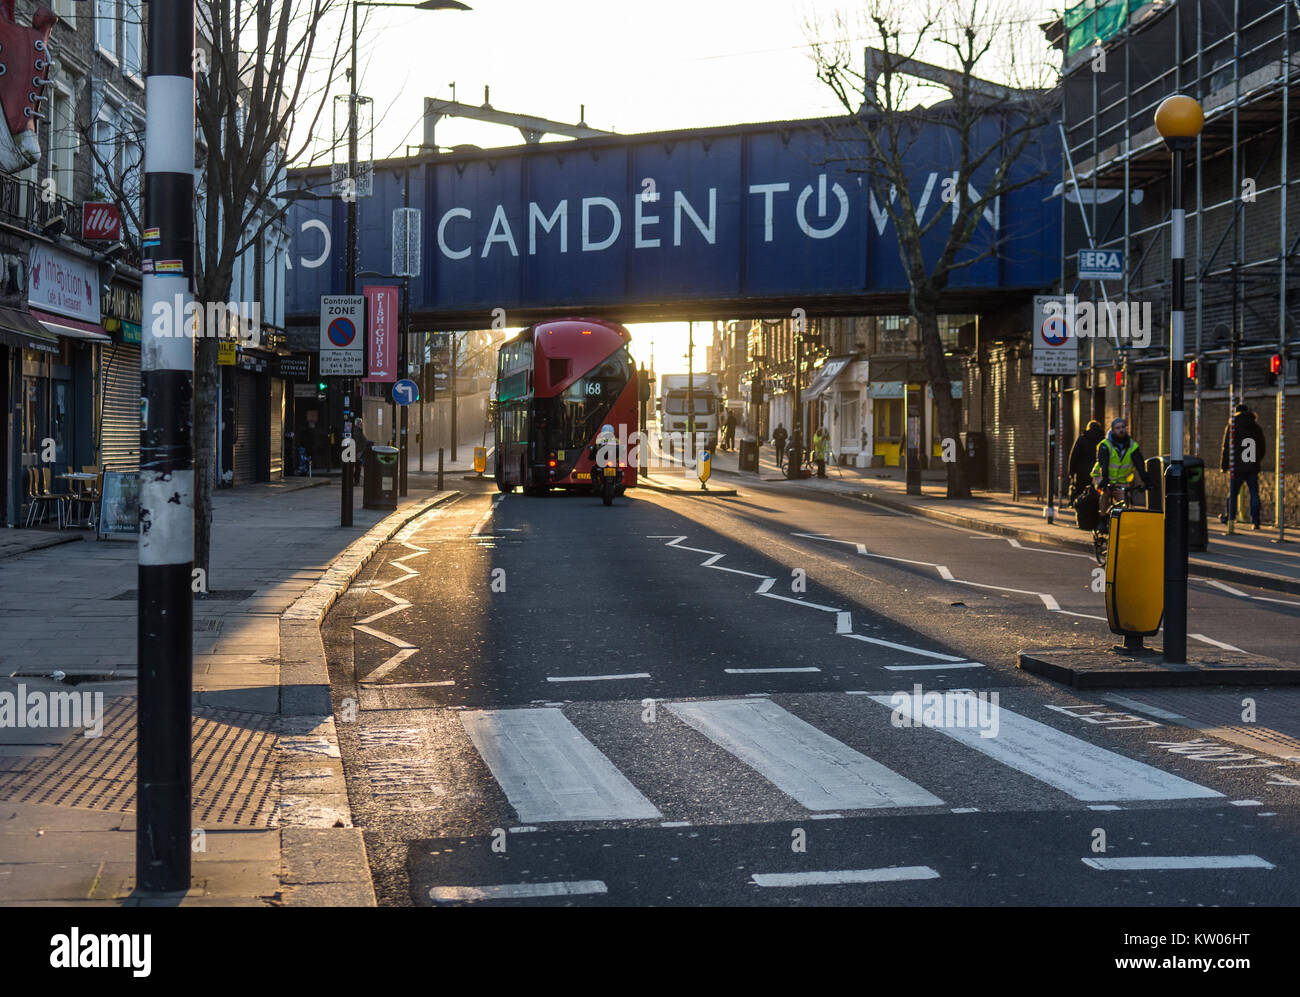 London, England - 12 January 2016: A New Bus For London double-decker bus at Chalk Farm Road during sunrise in Camden Town, North London. Stock Photo